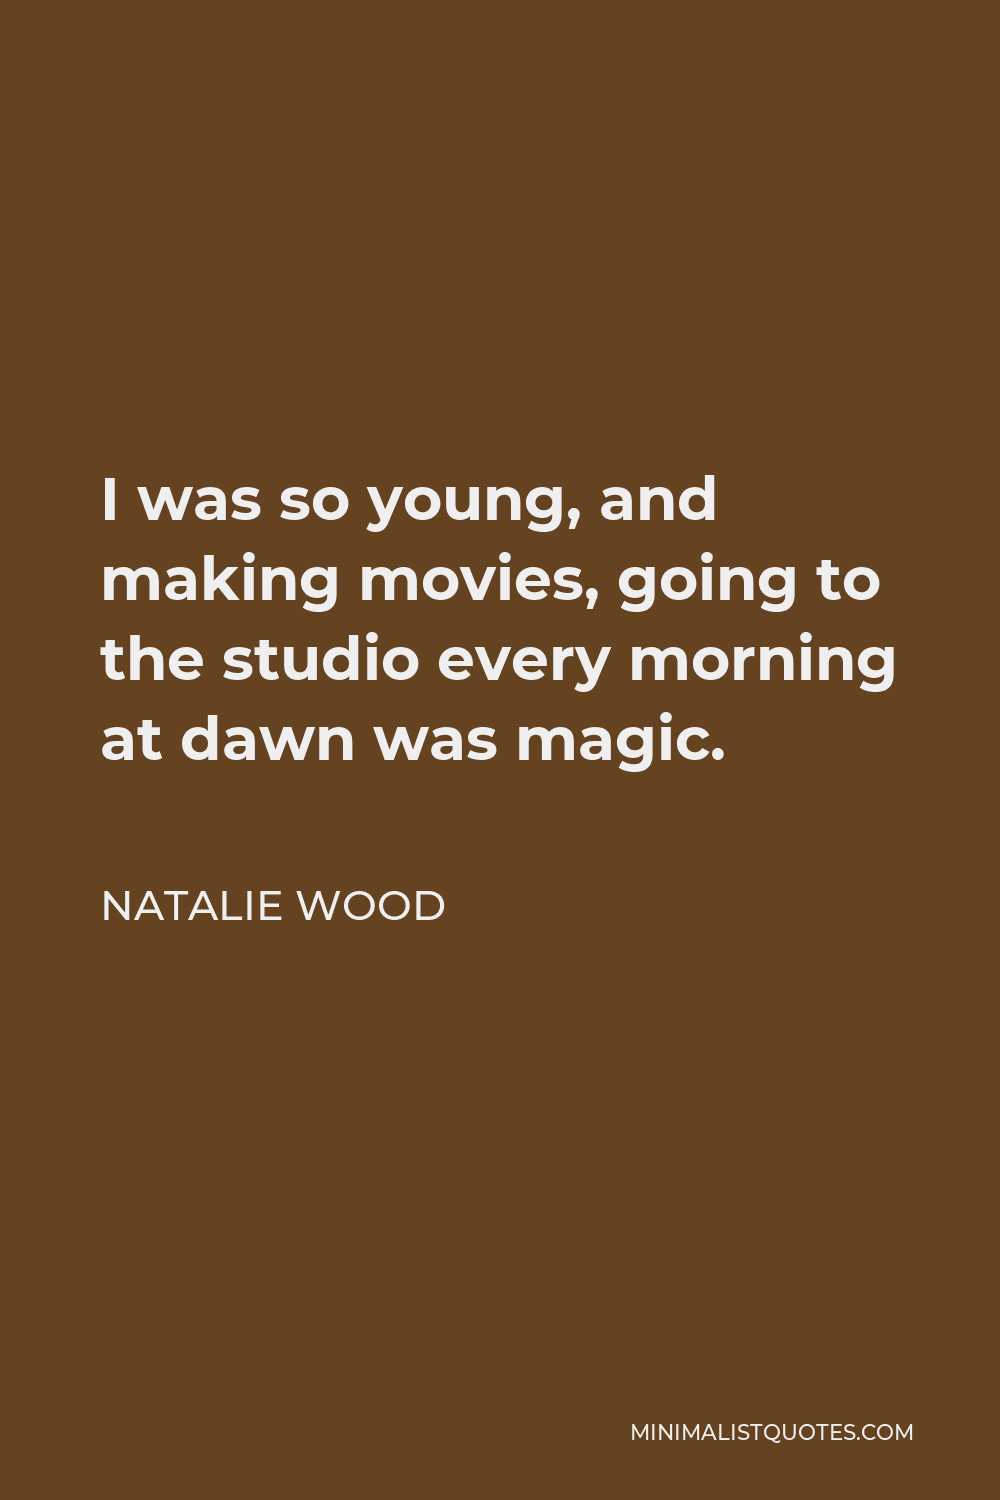 Natalie Wood Quote - I was so young, and making movies, going to the studio every morning at dawn was magic.